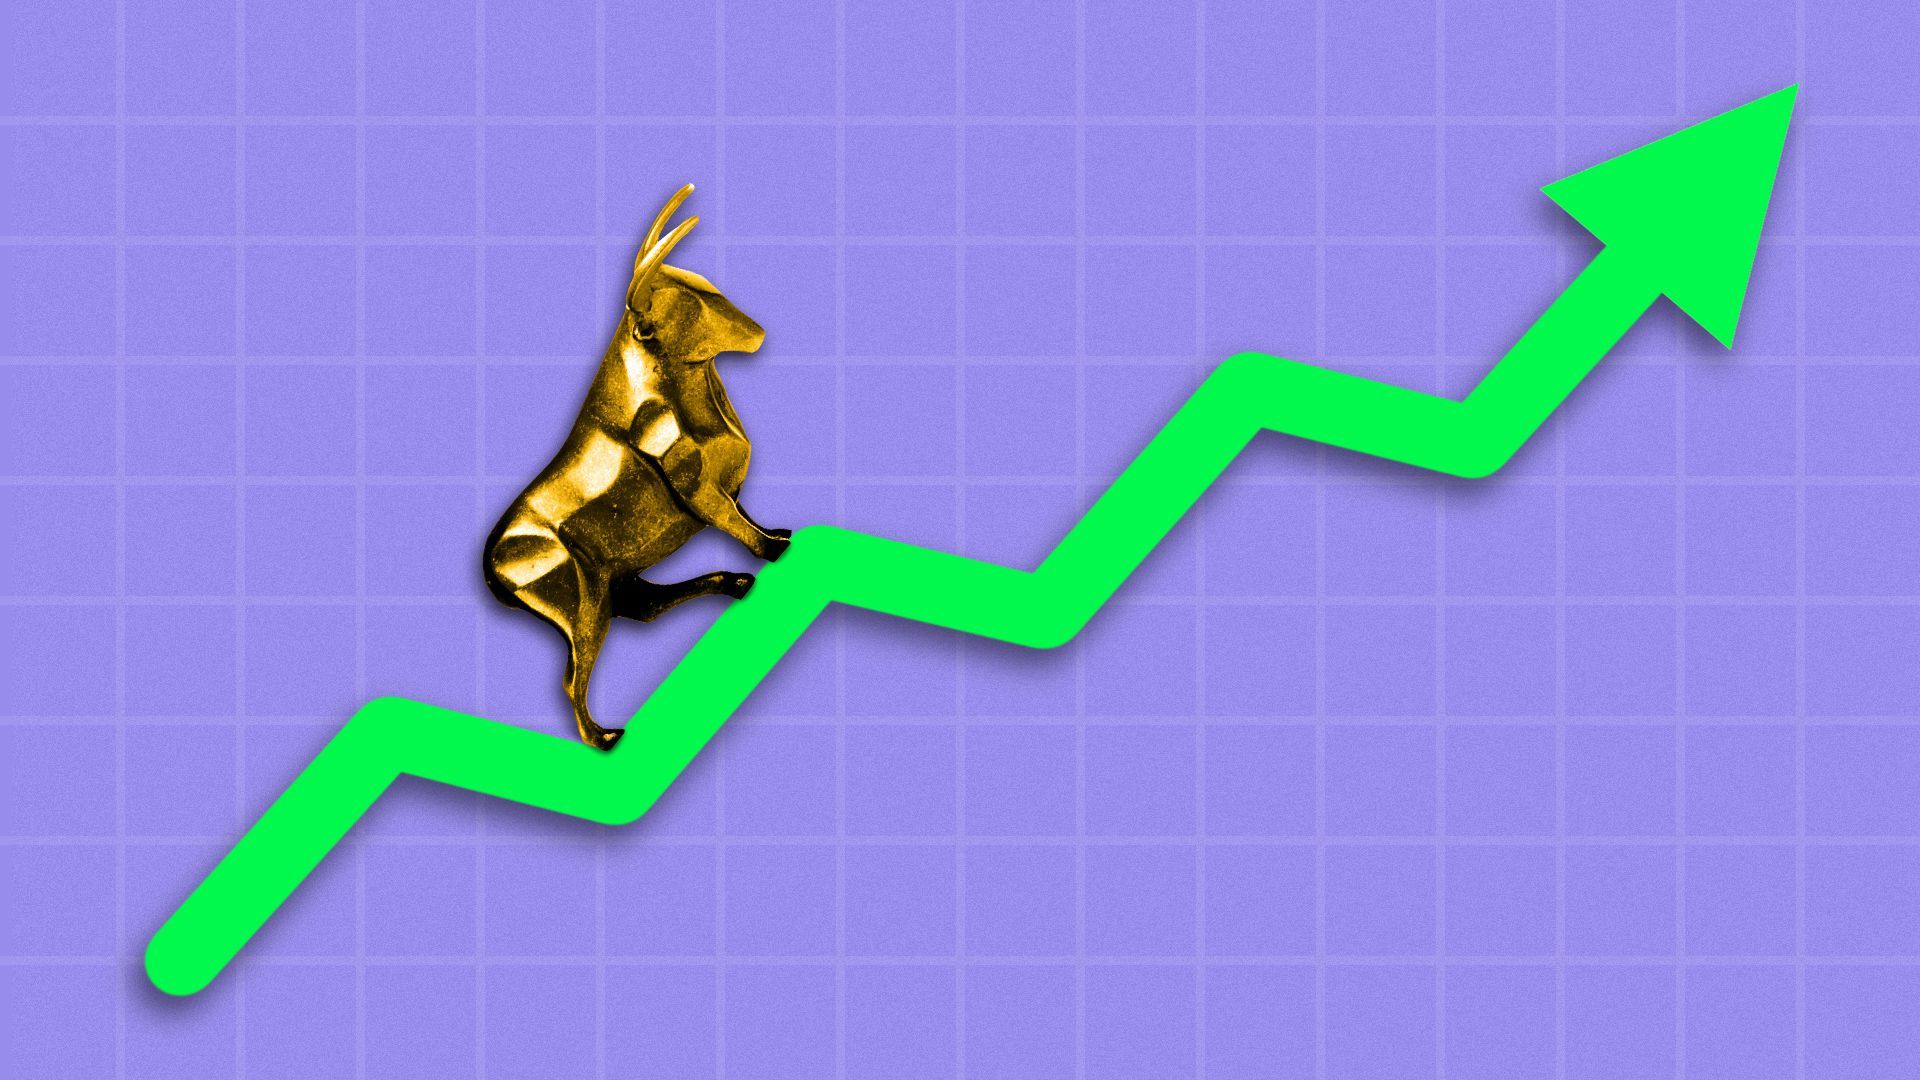 Illustration of an arrow point upwards with a bull on top.